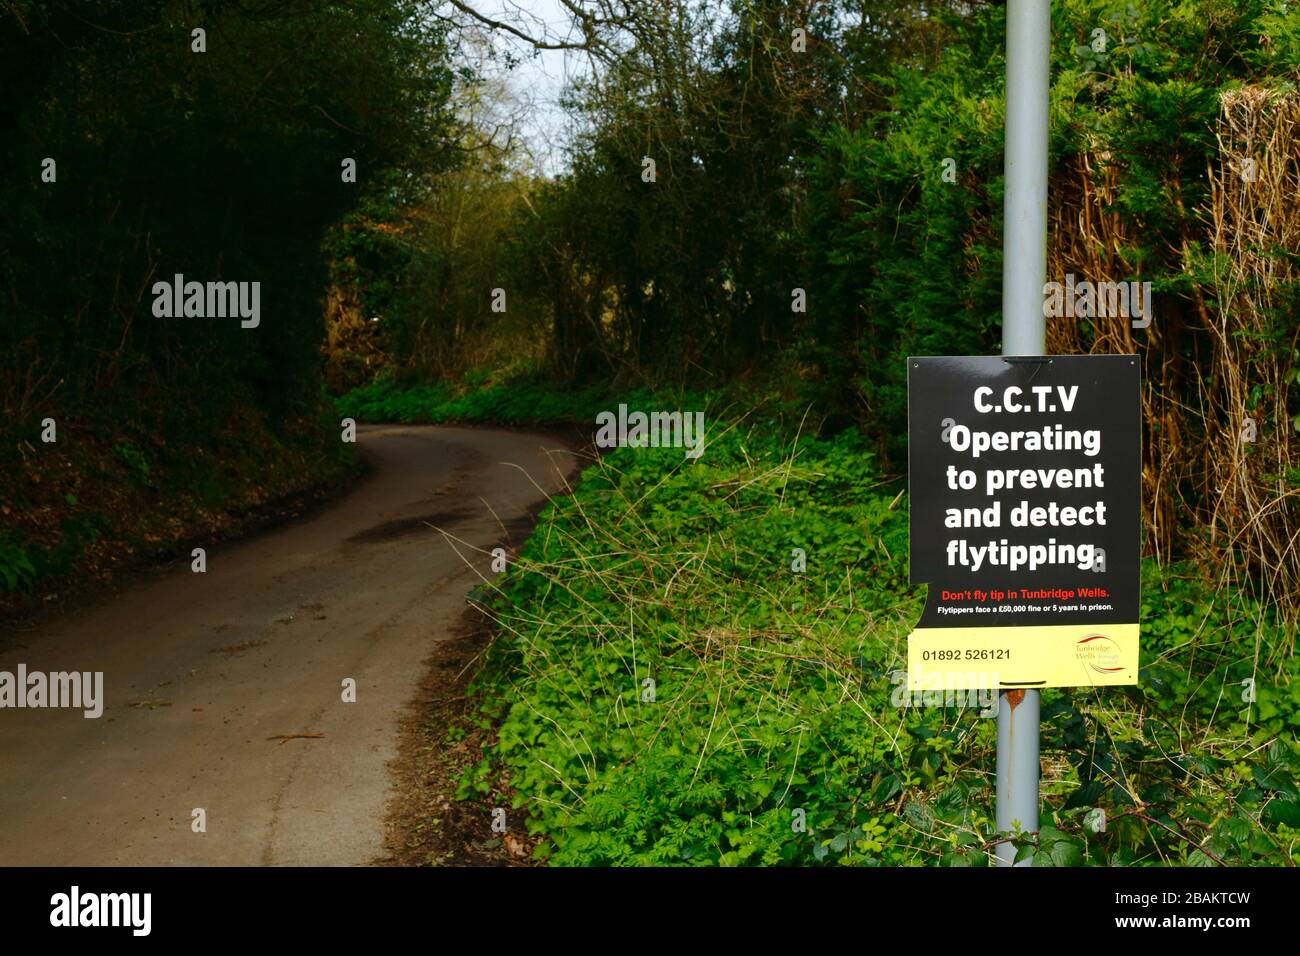 CCTV Operating to Prevent and Detect Flytipping sign on country lane in Weald of Kent near Tunbridge Wells, England Stock Photo